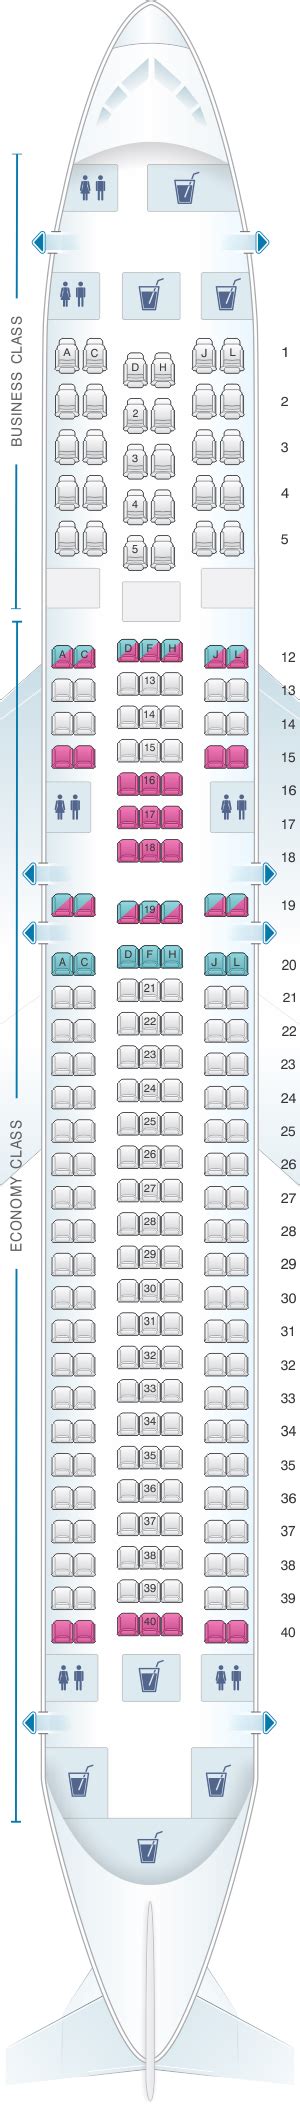 Seat Map Latam Airlines Boeing B767 300